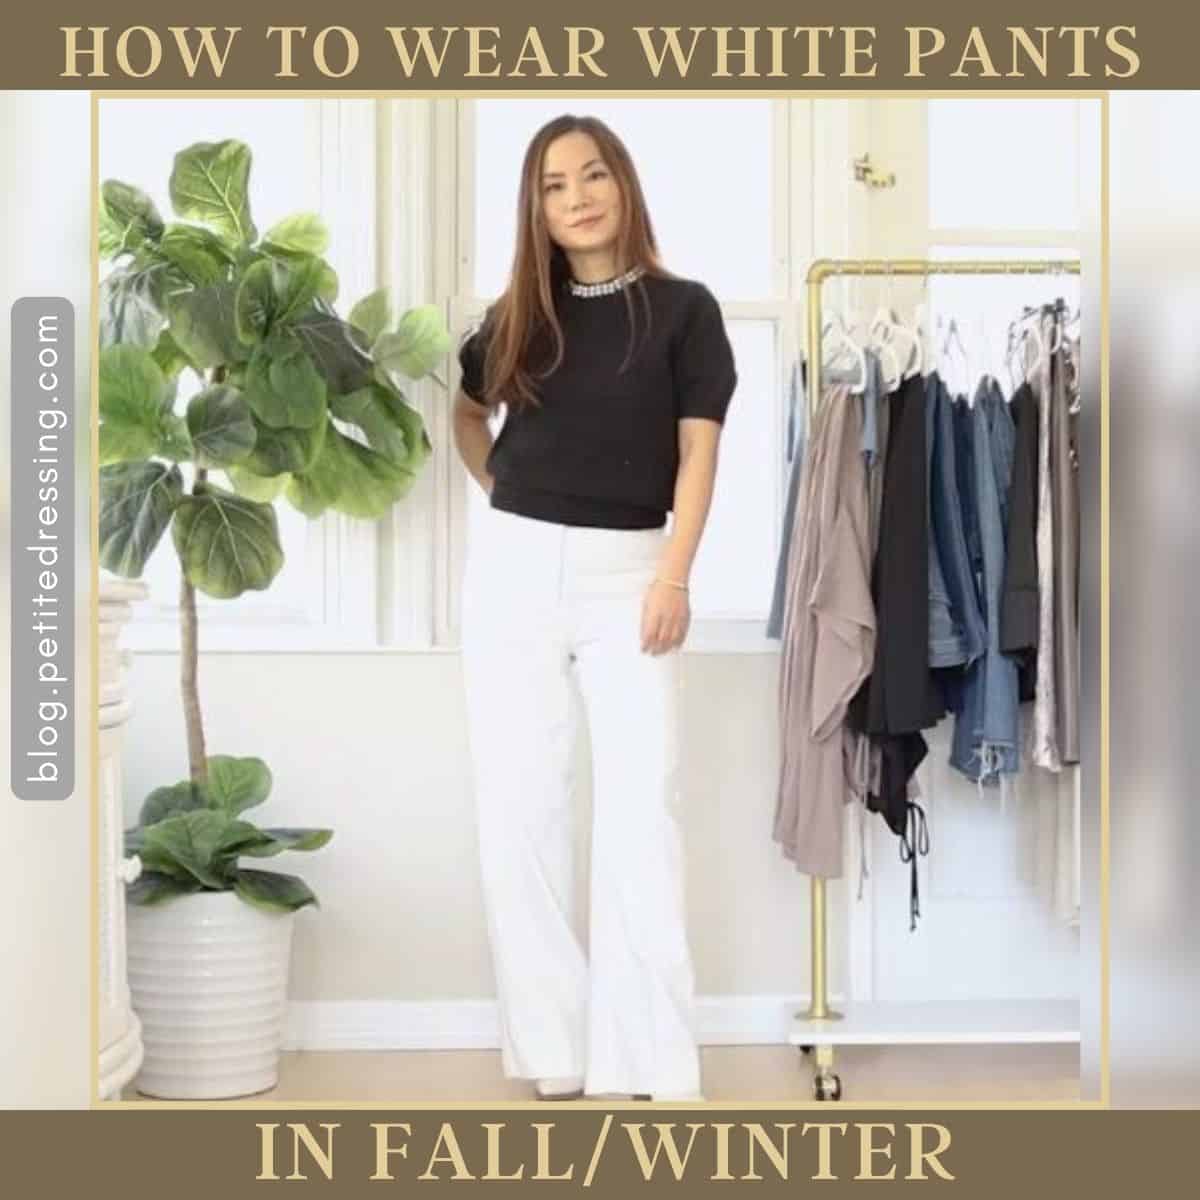 How to wear white pants in fall/winter - Petite Dressing